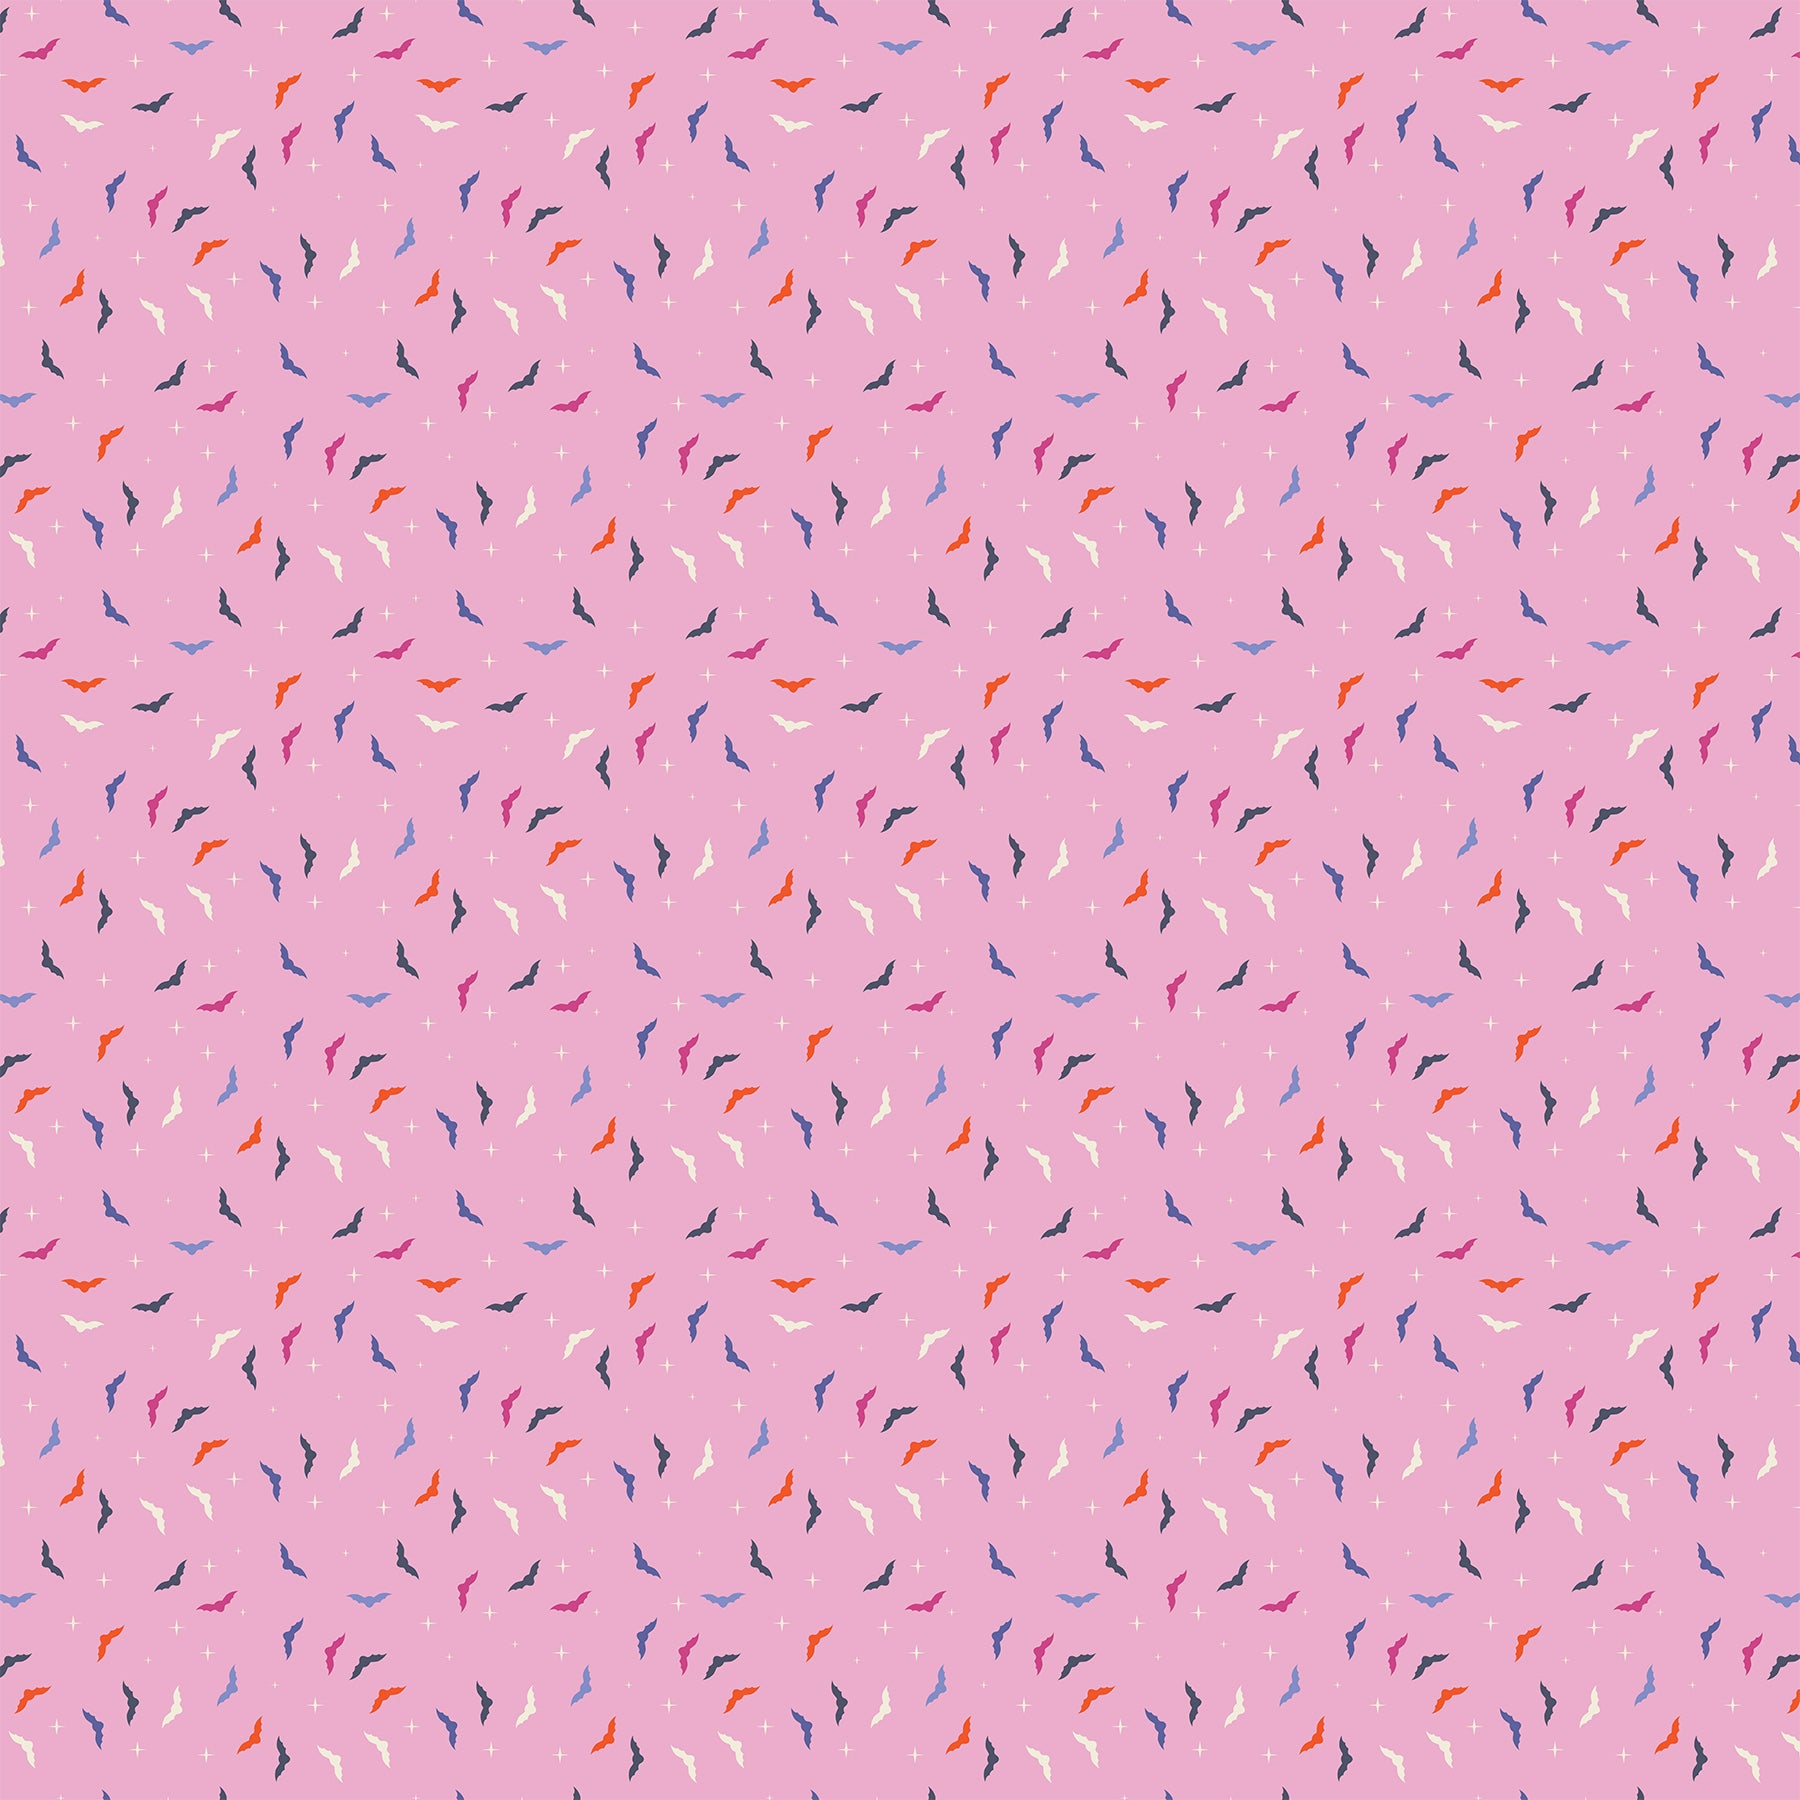 Manufacturer: Figo Fabrics Designer: Dana Willard Collection: Ghosttown Print Name: Ditsy Bats in Pink Material: 100% Cotton Weight: Quilting  SKU: 90518-21 Width: 44 inches